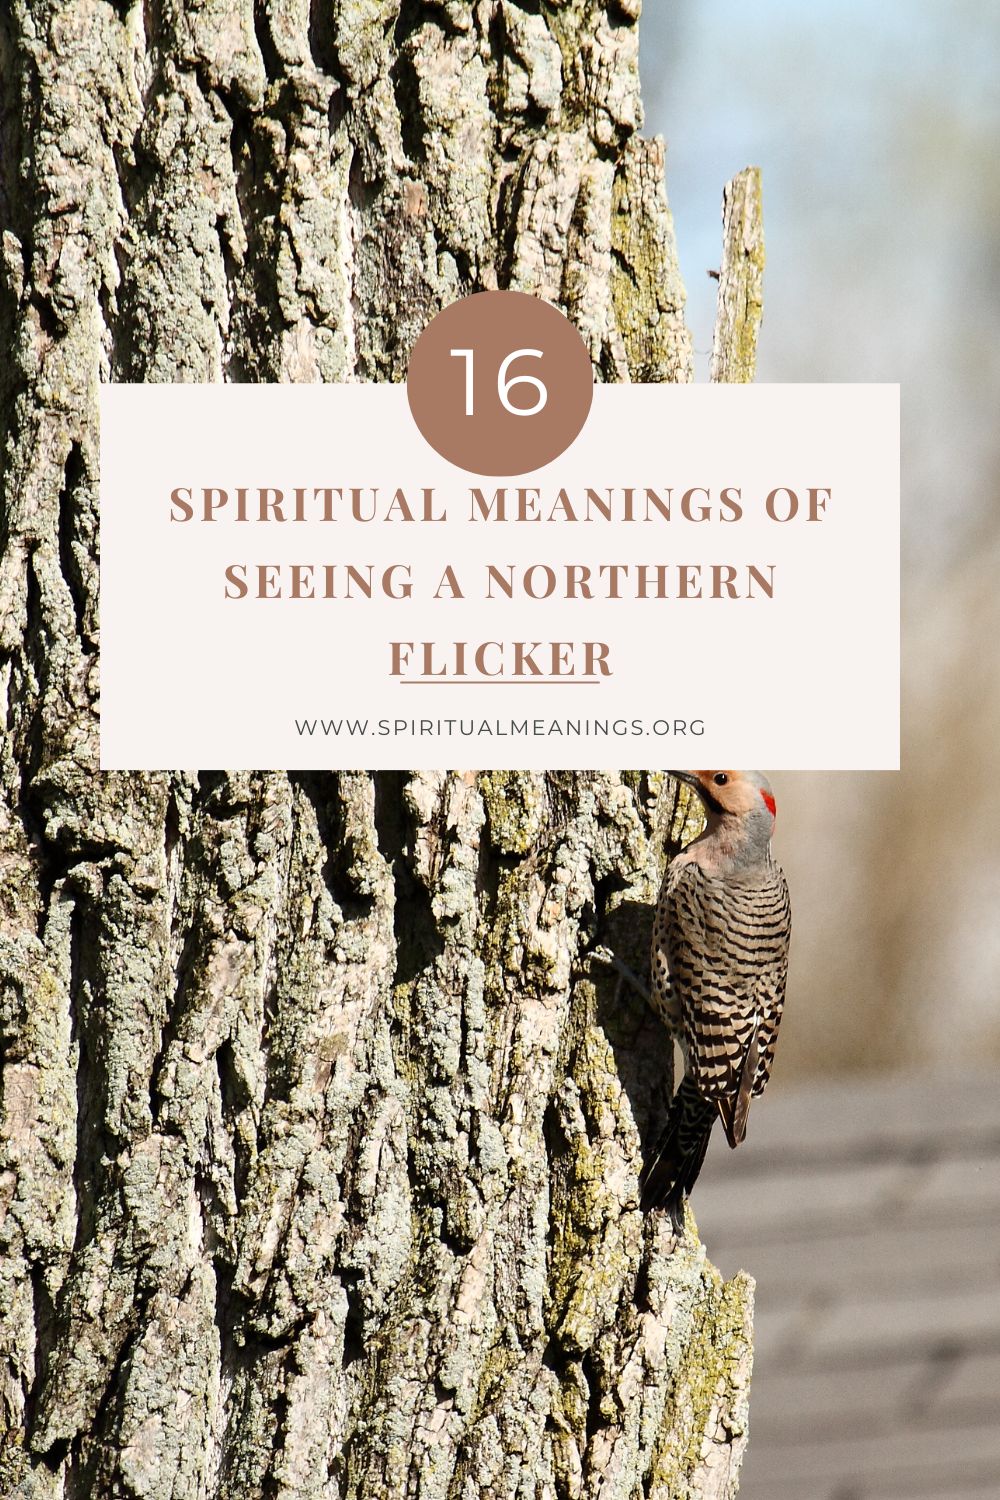 The Northern Flickers And Their Spiritual Meanings